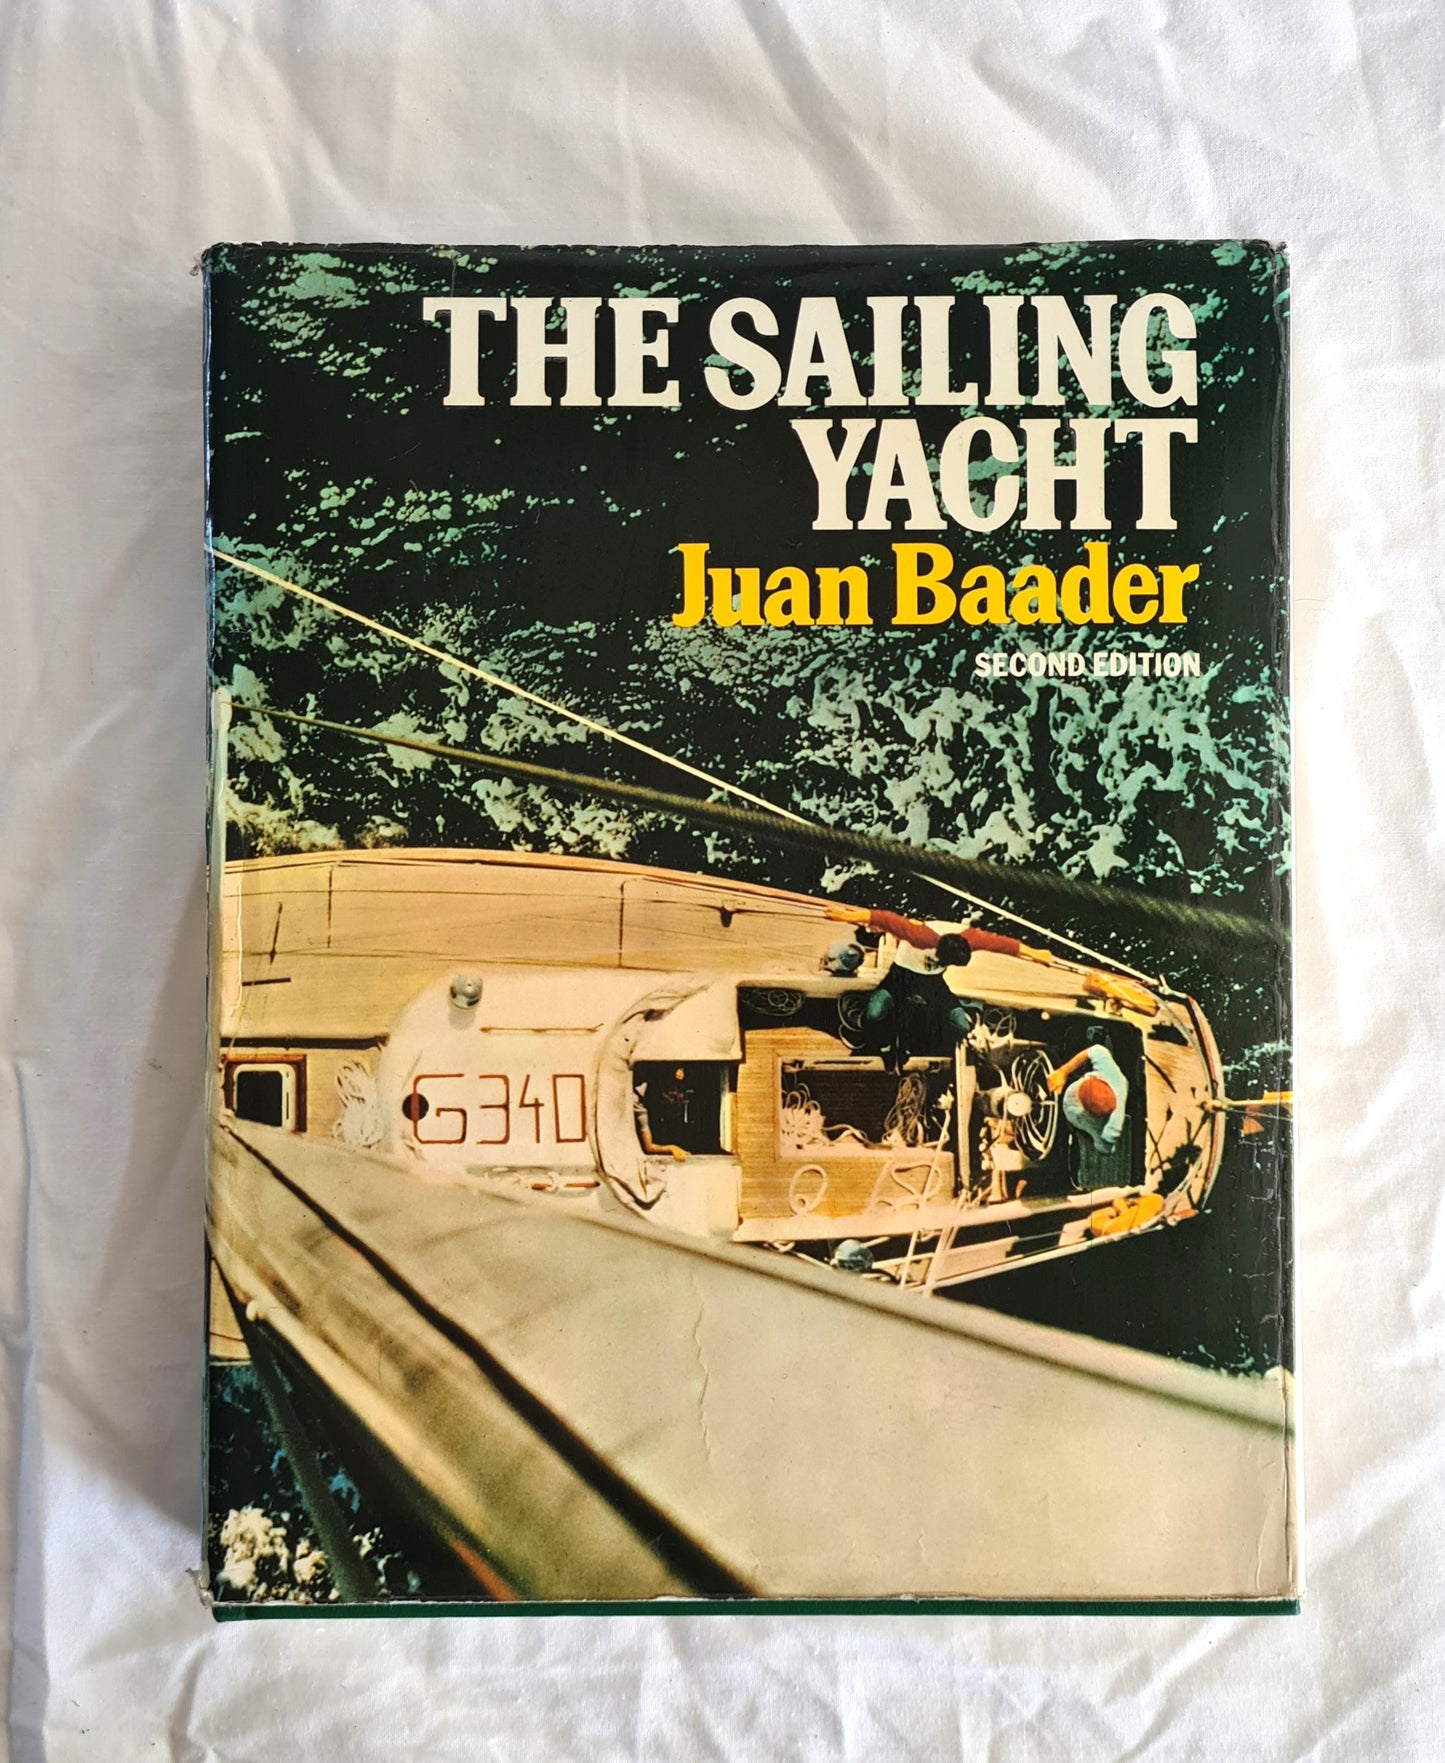 The Sailing Yacht  by Juan Baader  Translated from the German by Inge Moore